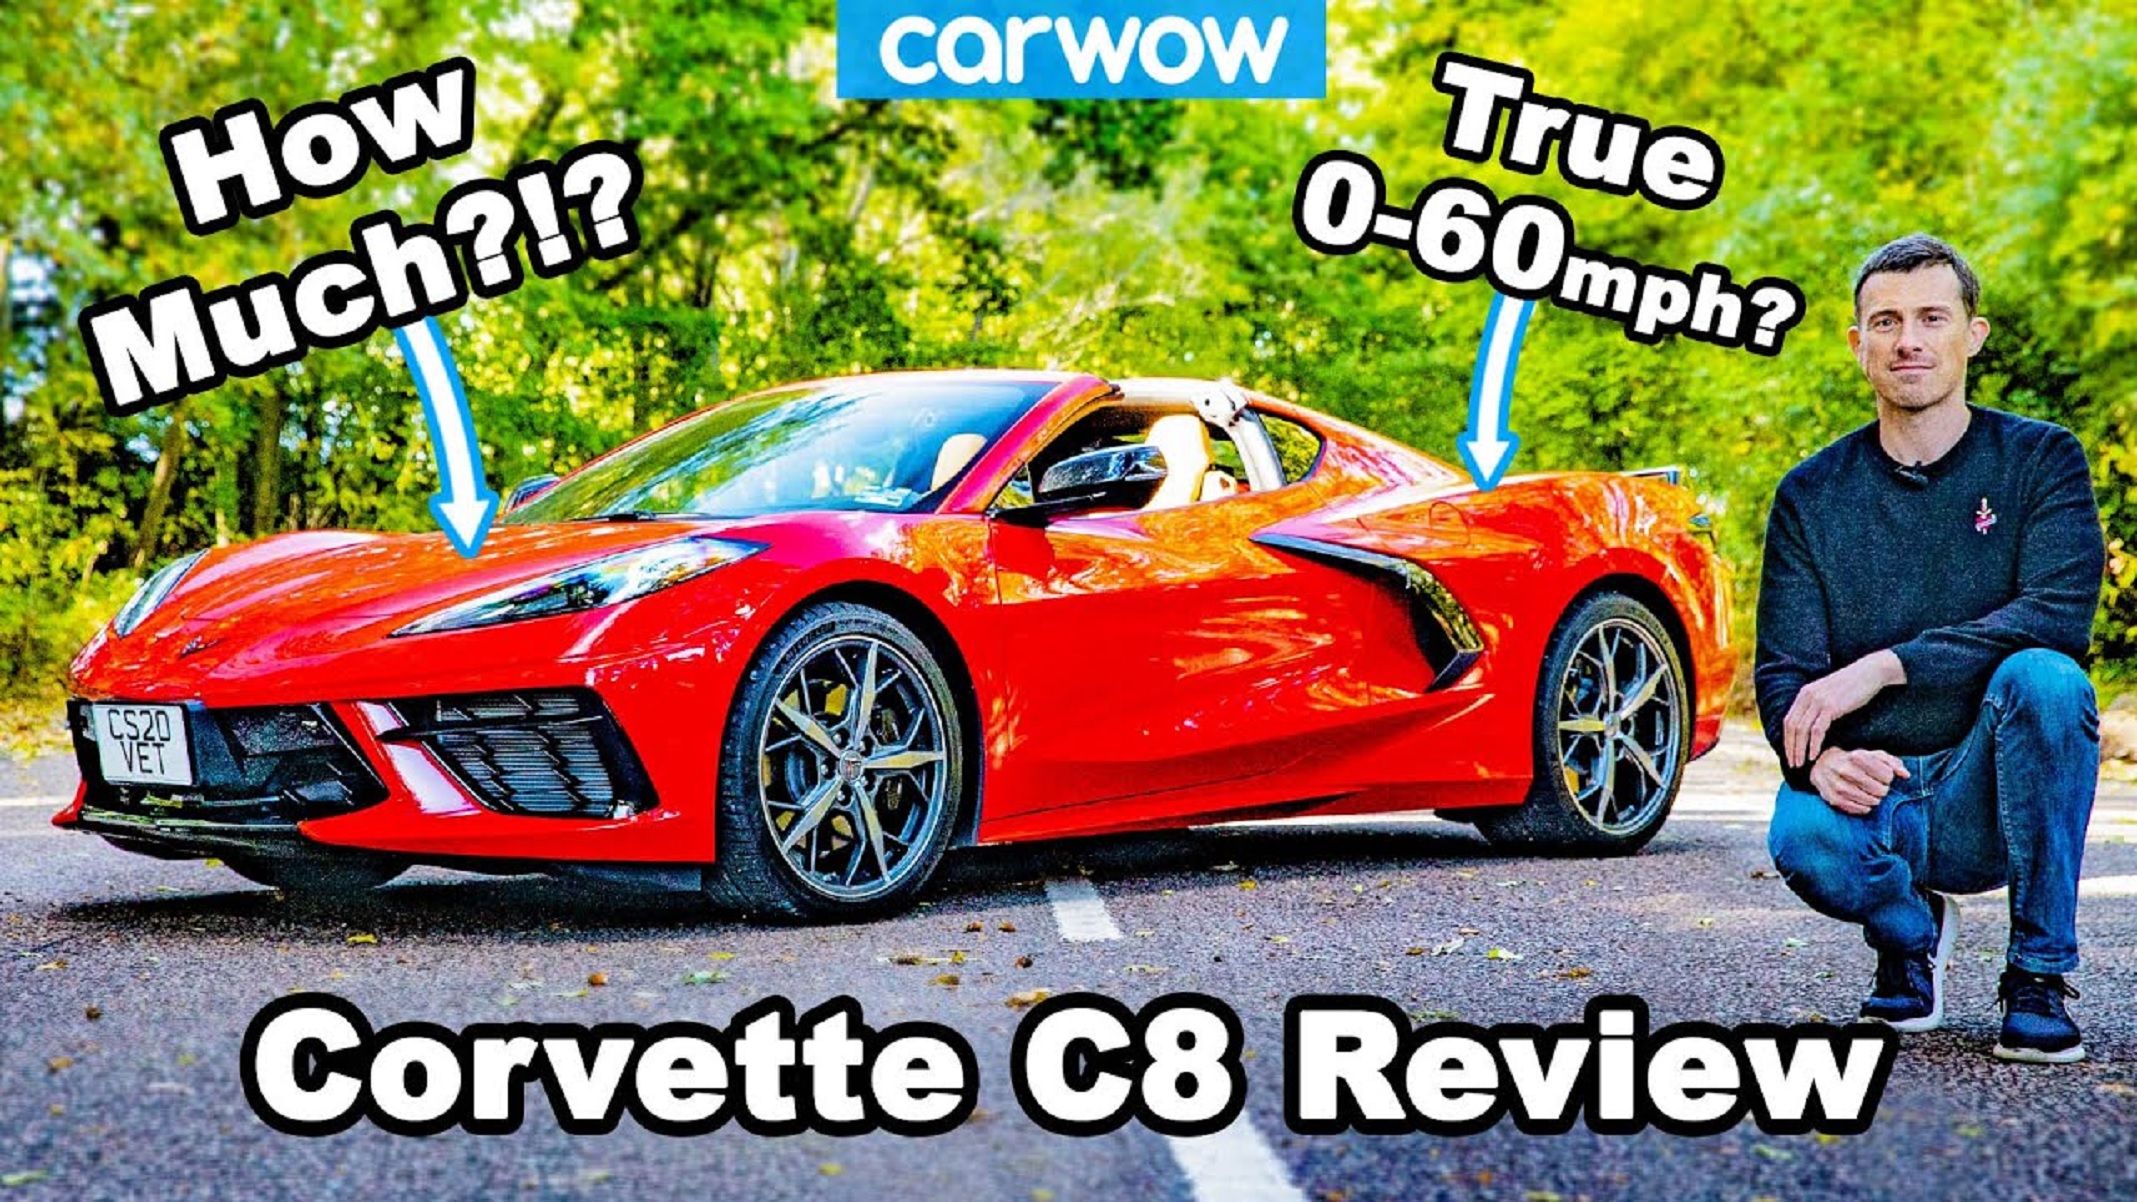 Carwow host Mat Watson with a red 2020 Chevrolet C8 Corvette